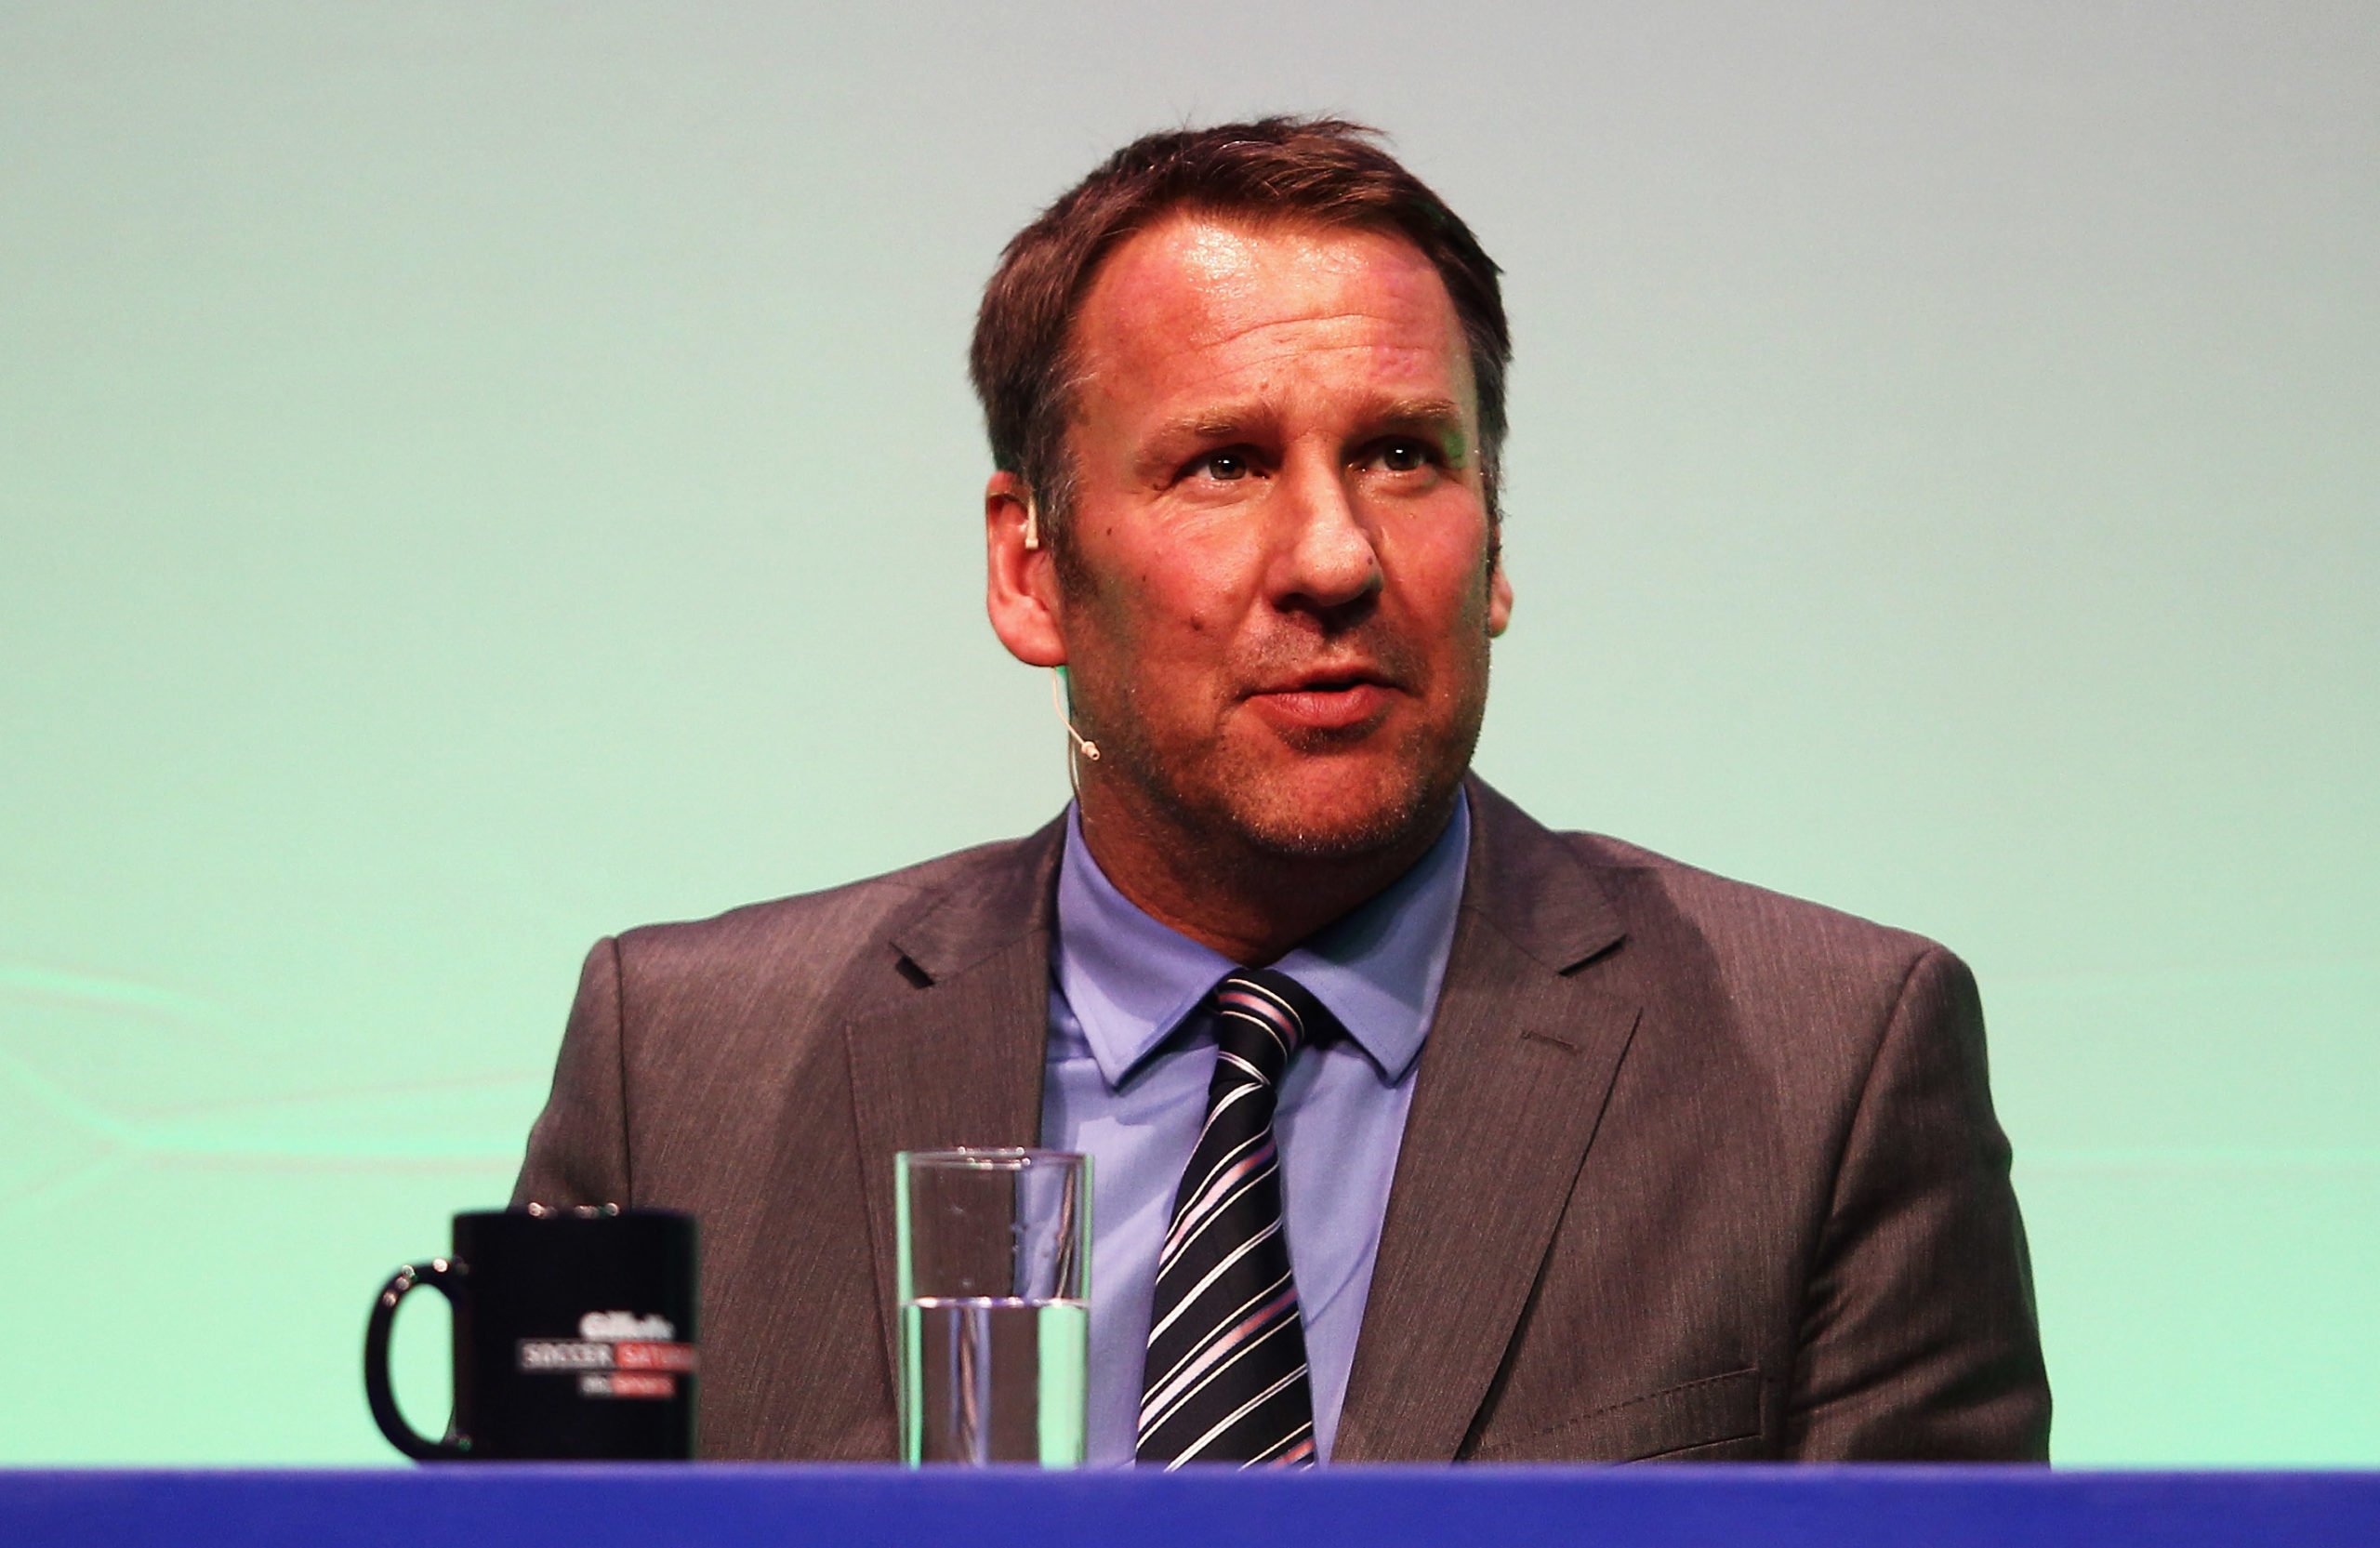 Paul Merson: West Ham are a nightmare for me but I like what Everton are doing